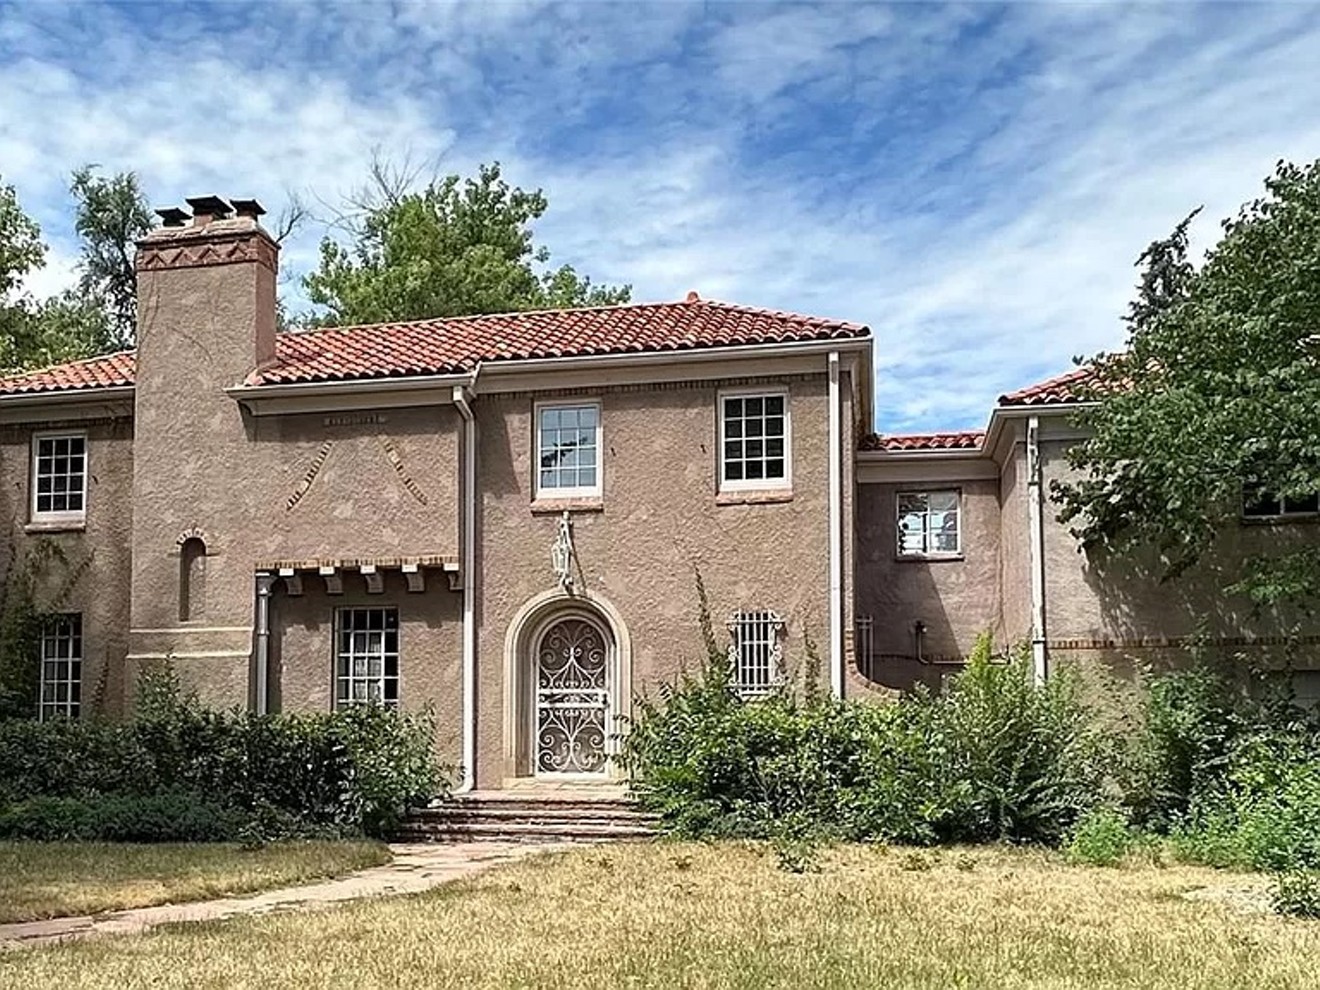 This Park Hill mansion was slated for demolition before neighbors intervened.